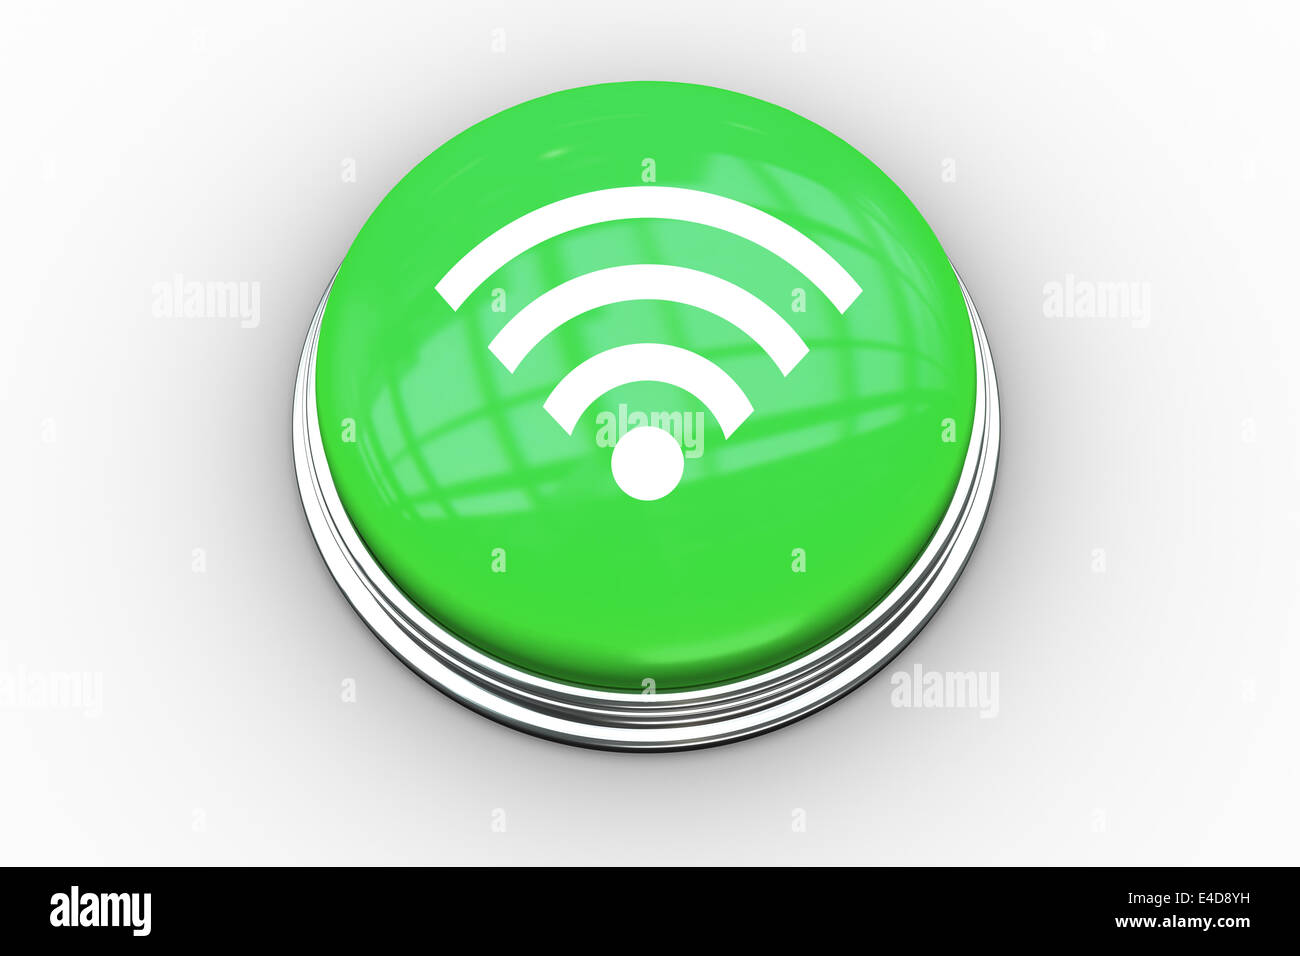 Composite image of wifi symbol graphic on button Stock Photo